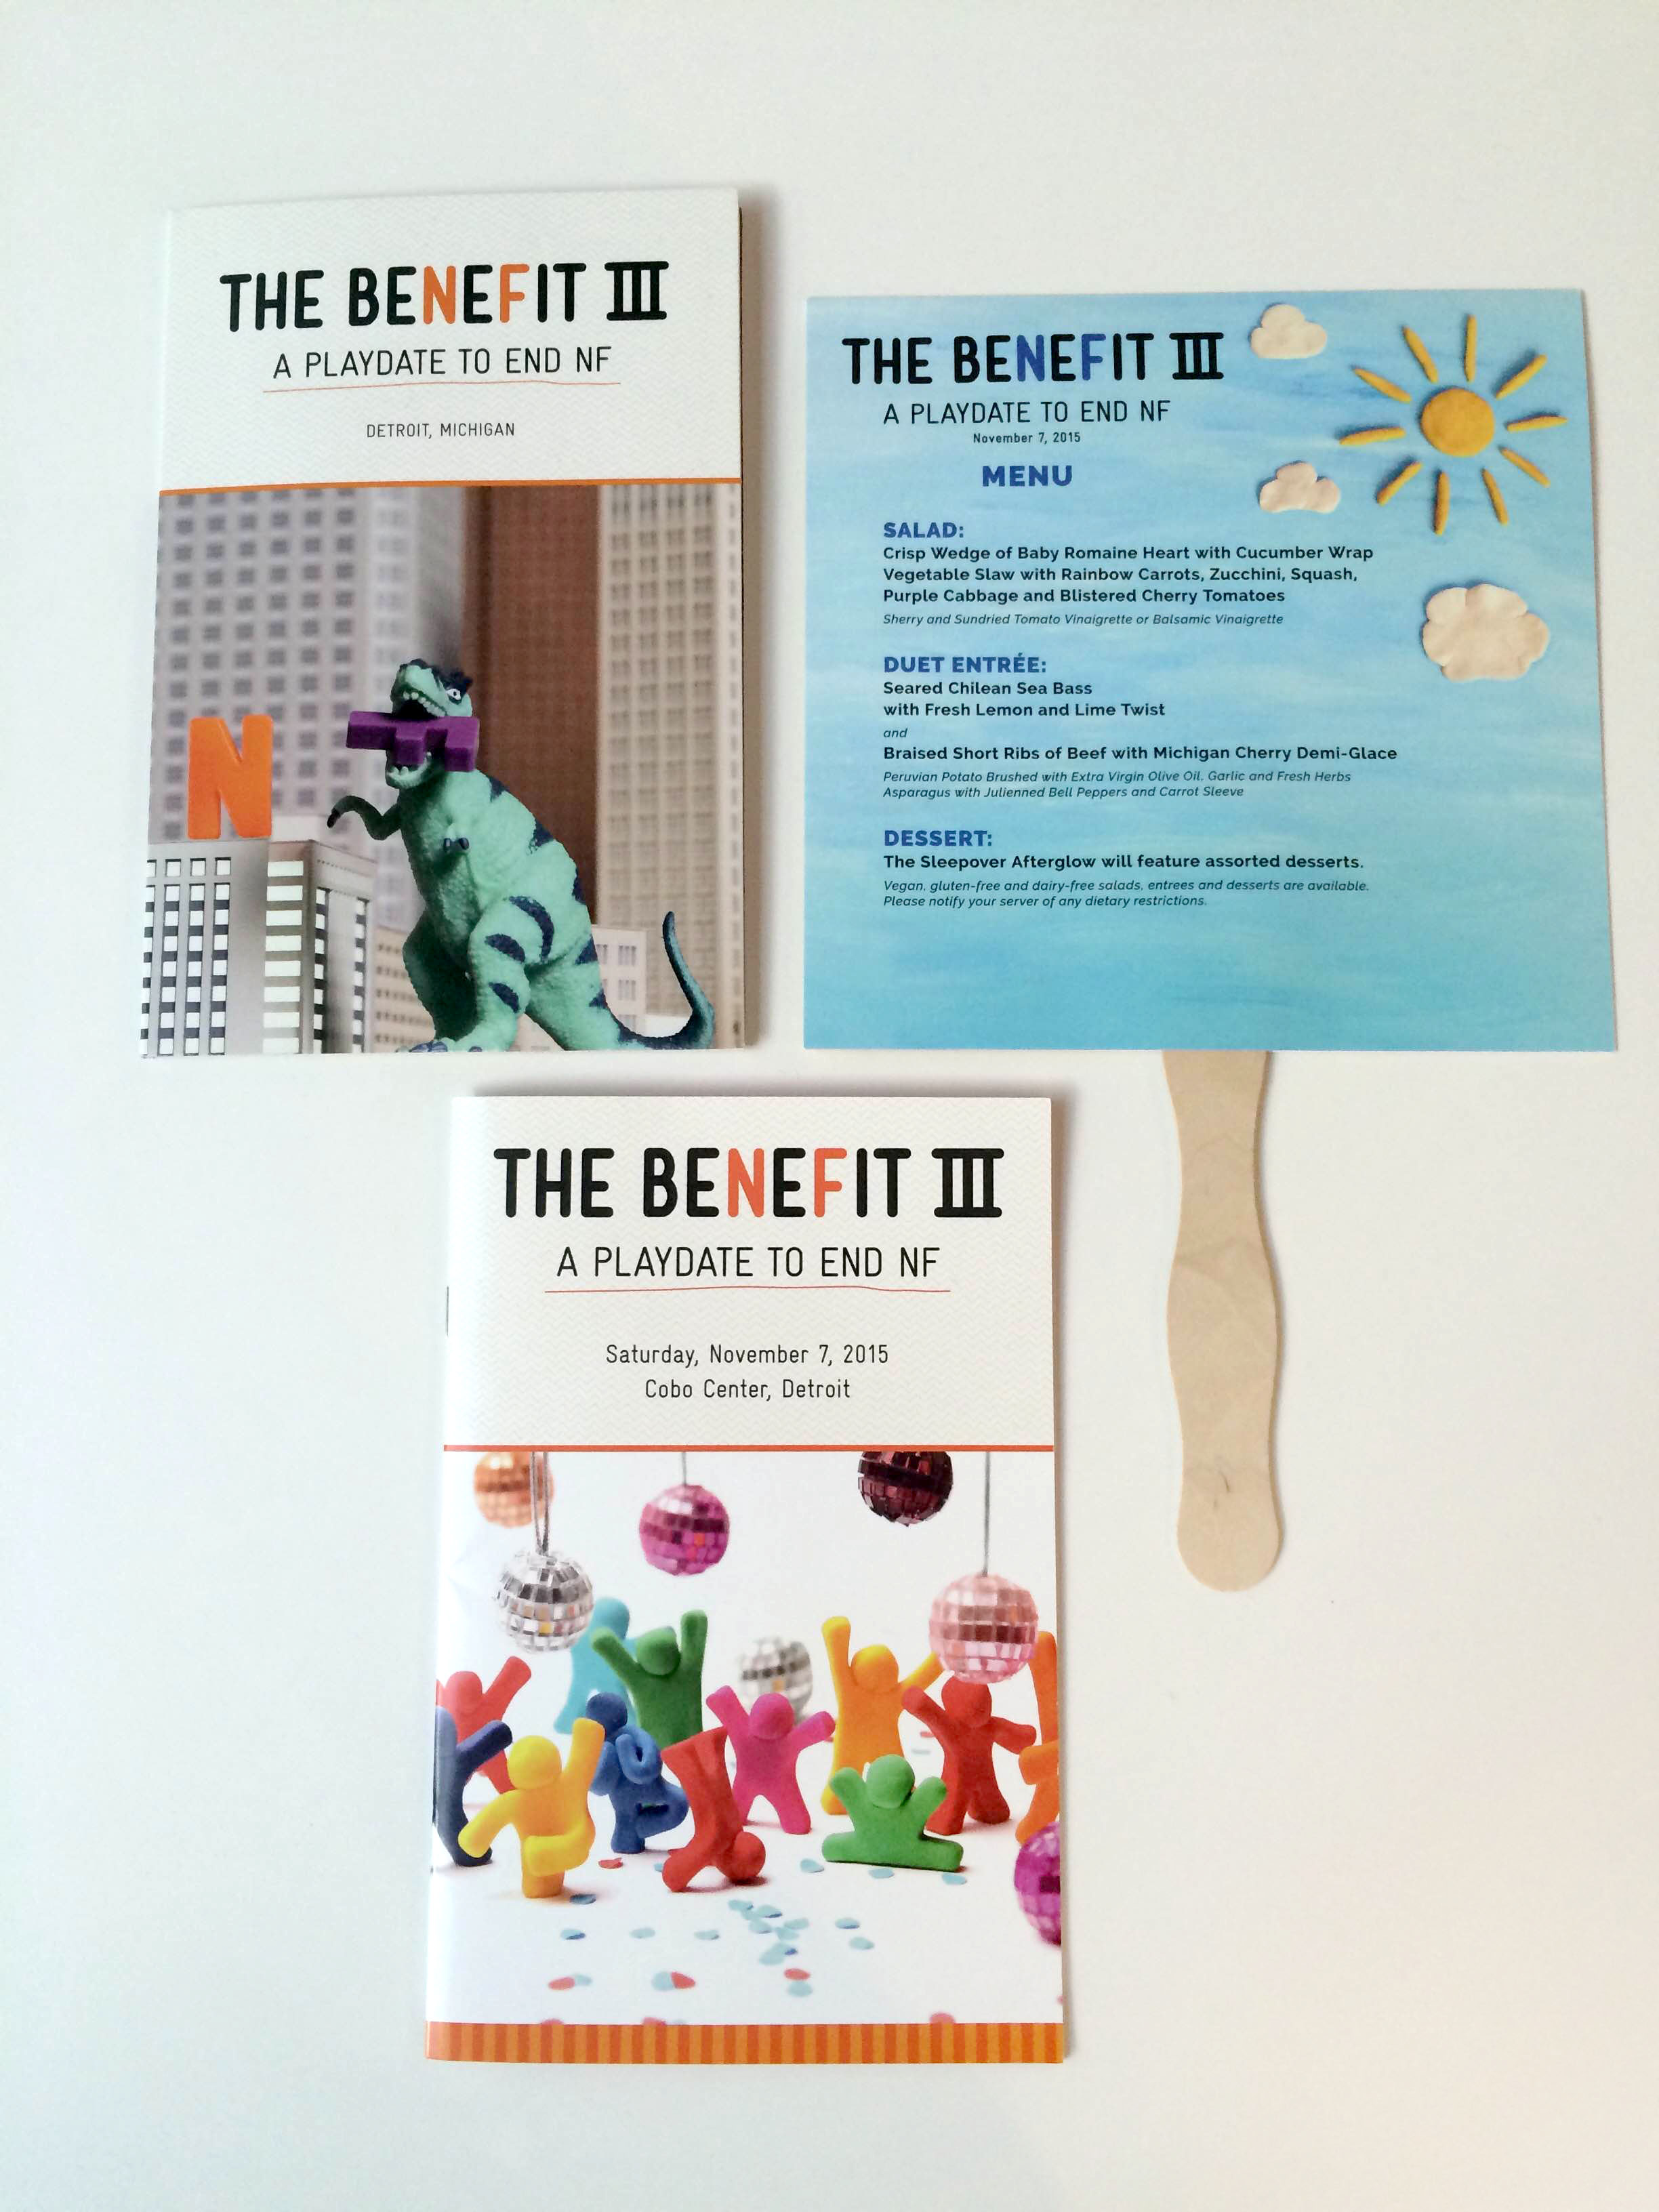 TheBenefit3-PrintCollateral-20160226-004.jpg